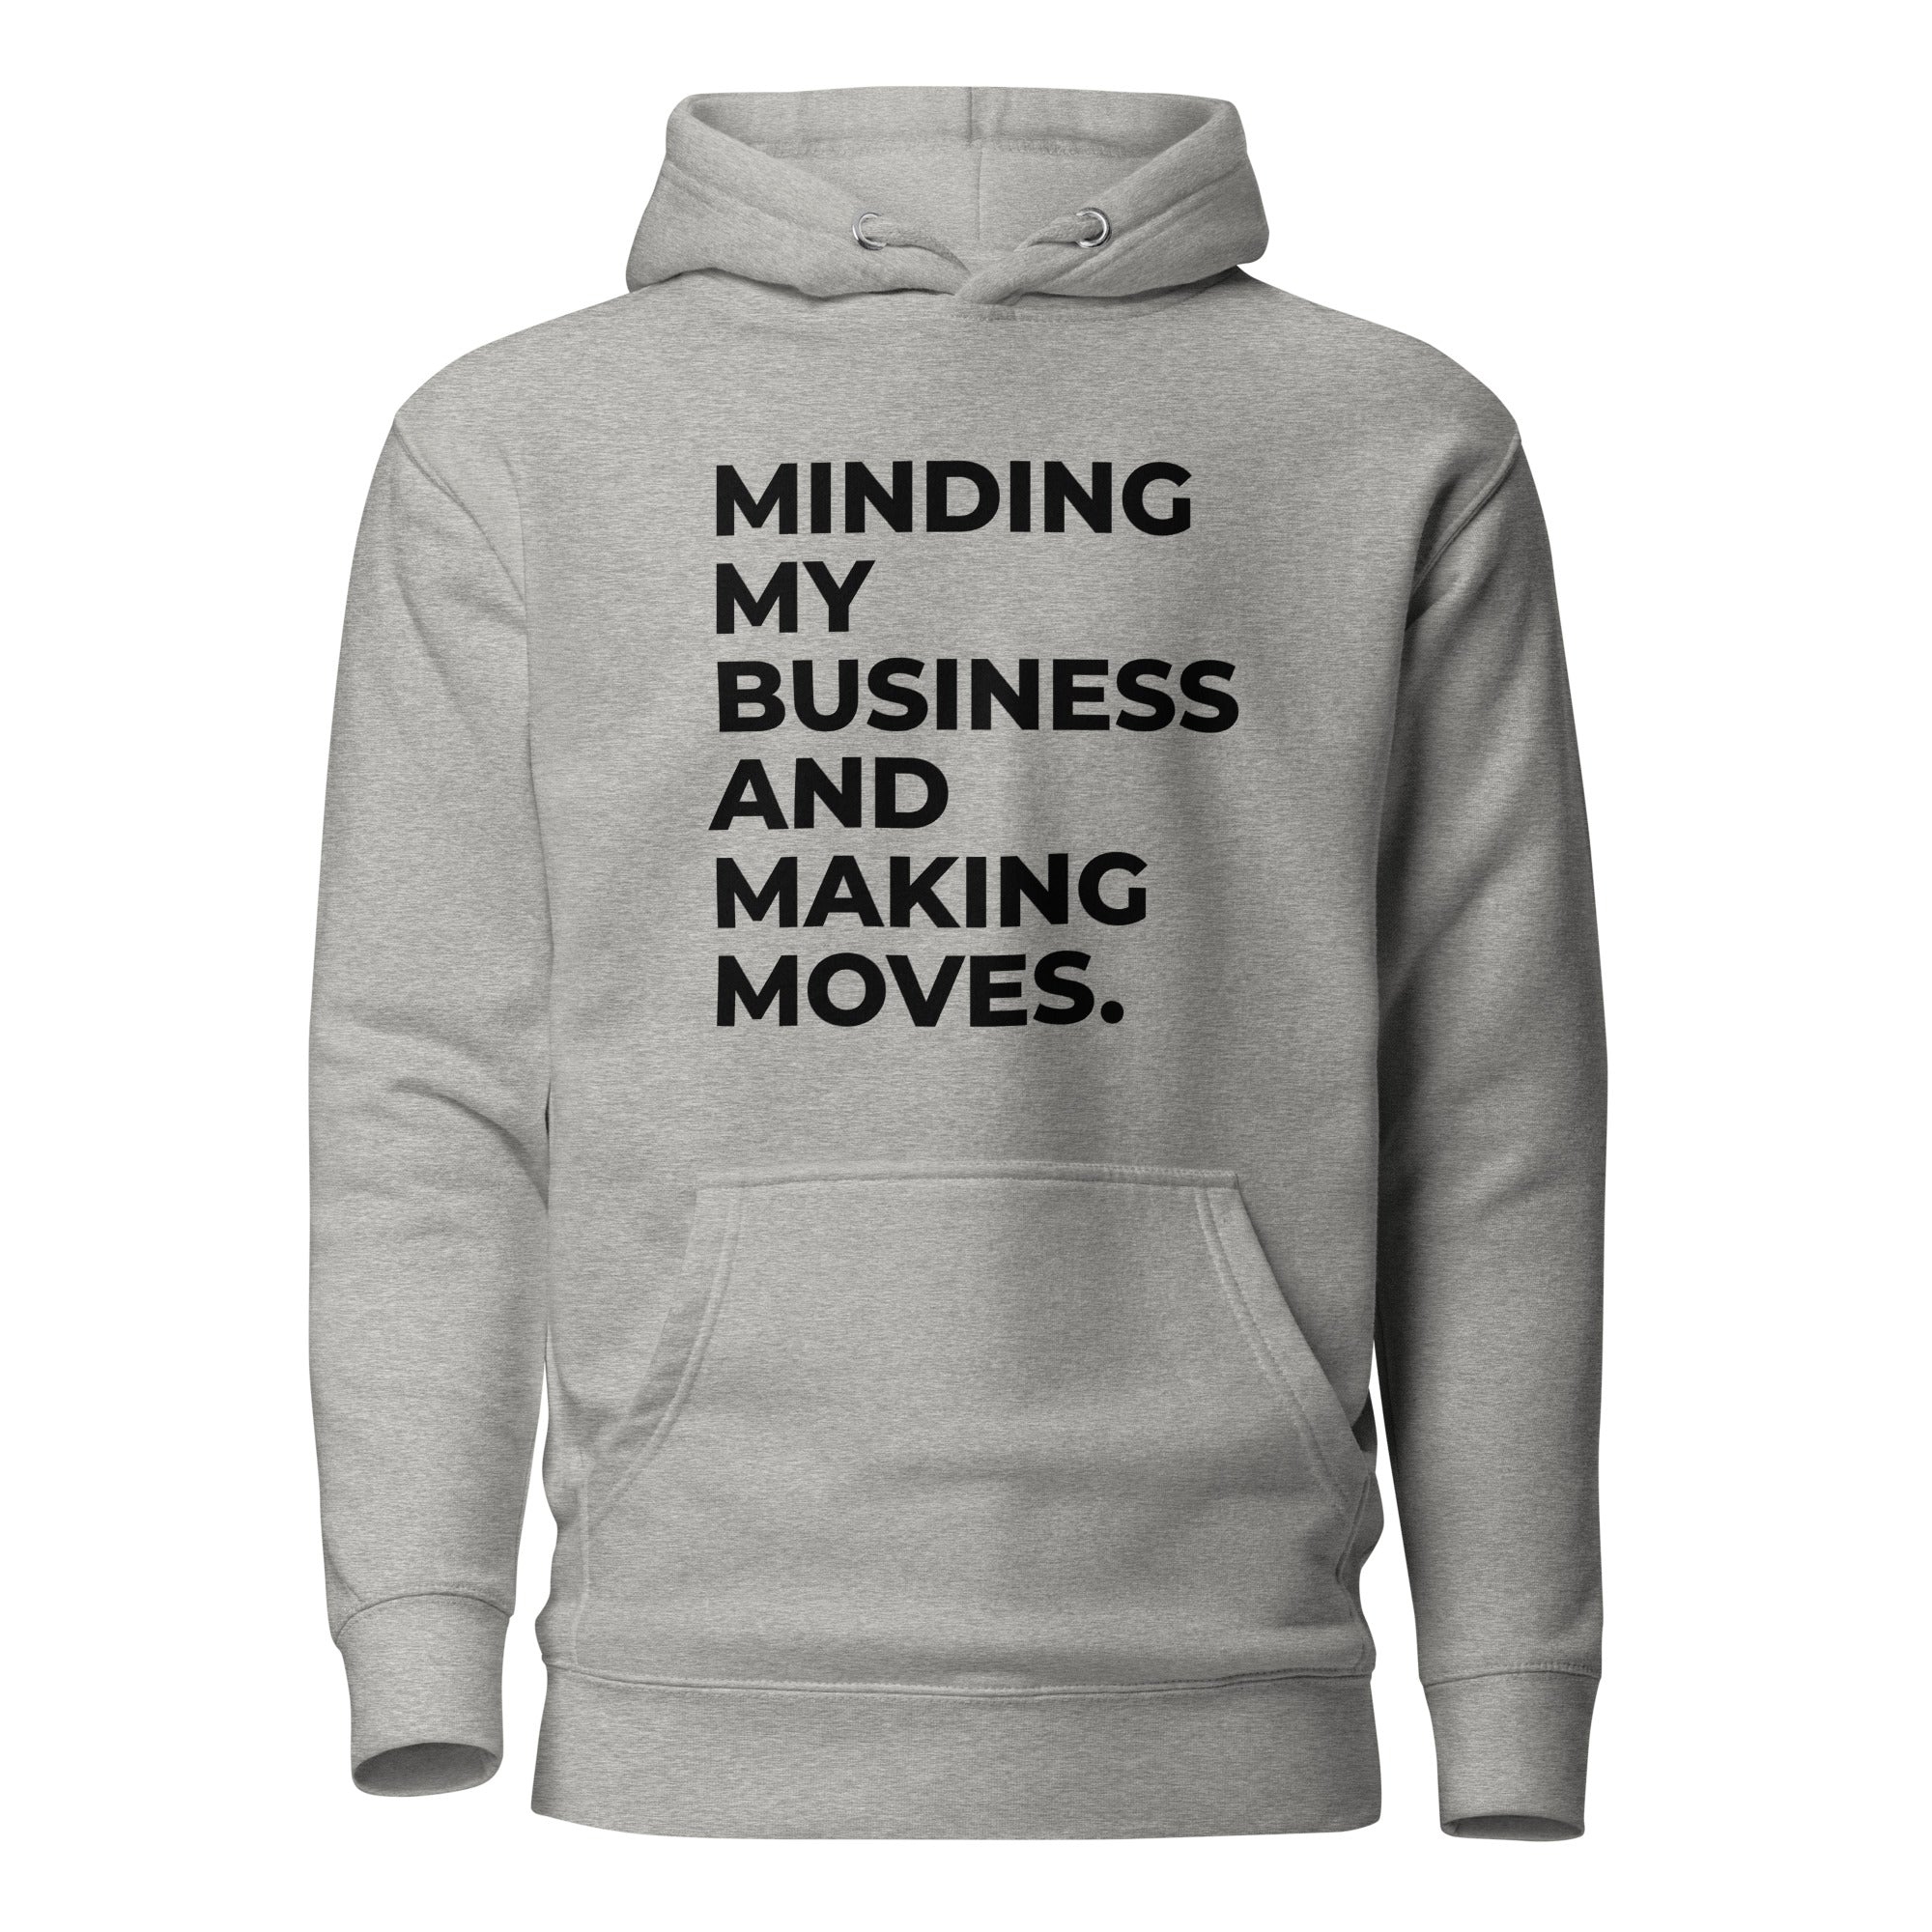 Minding My Business and Making Moves. Unisex Hoodie - Nailah Renae